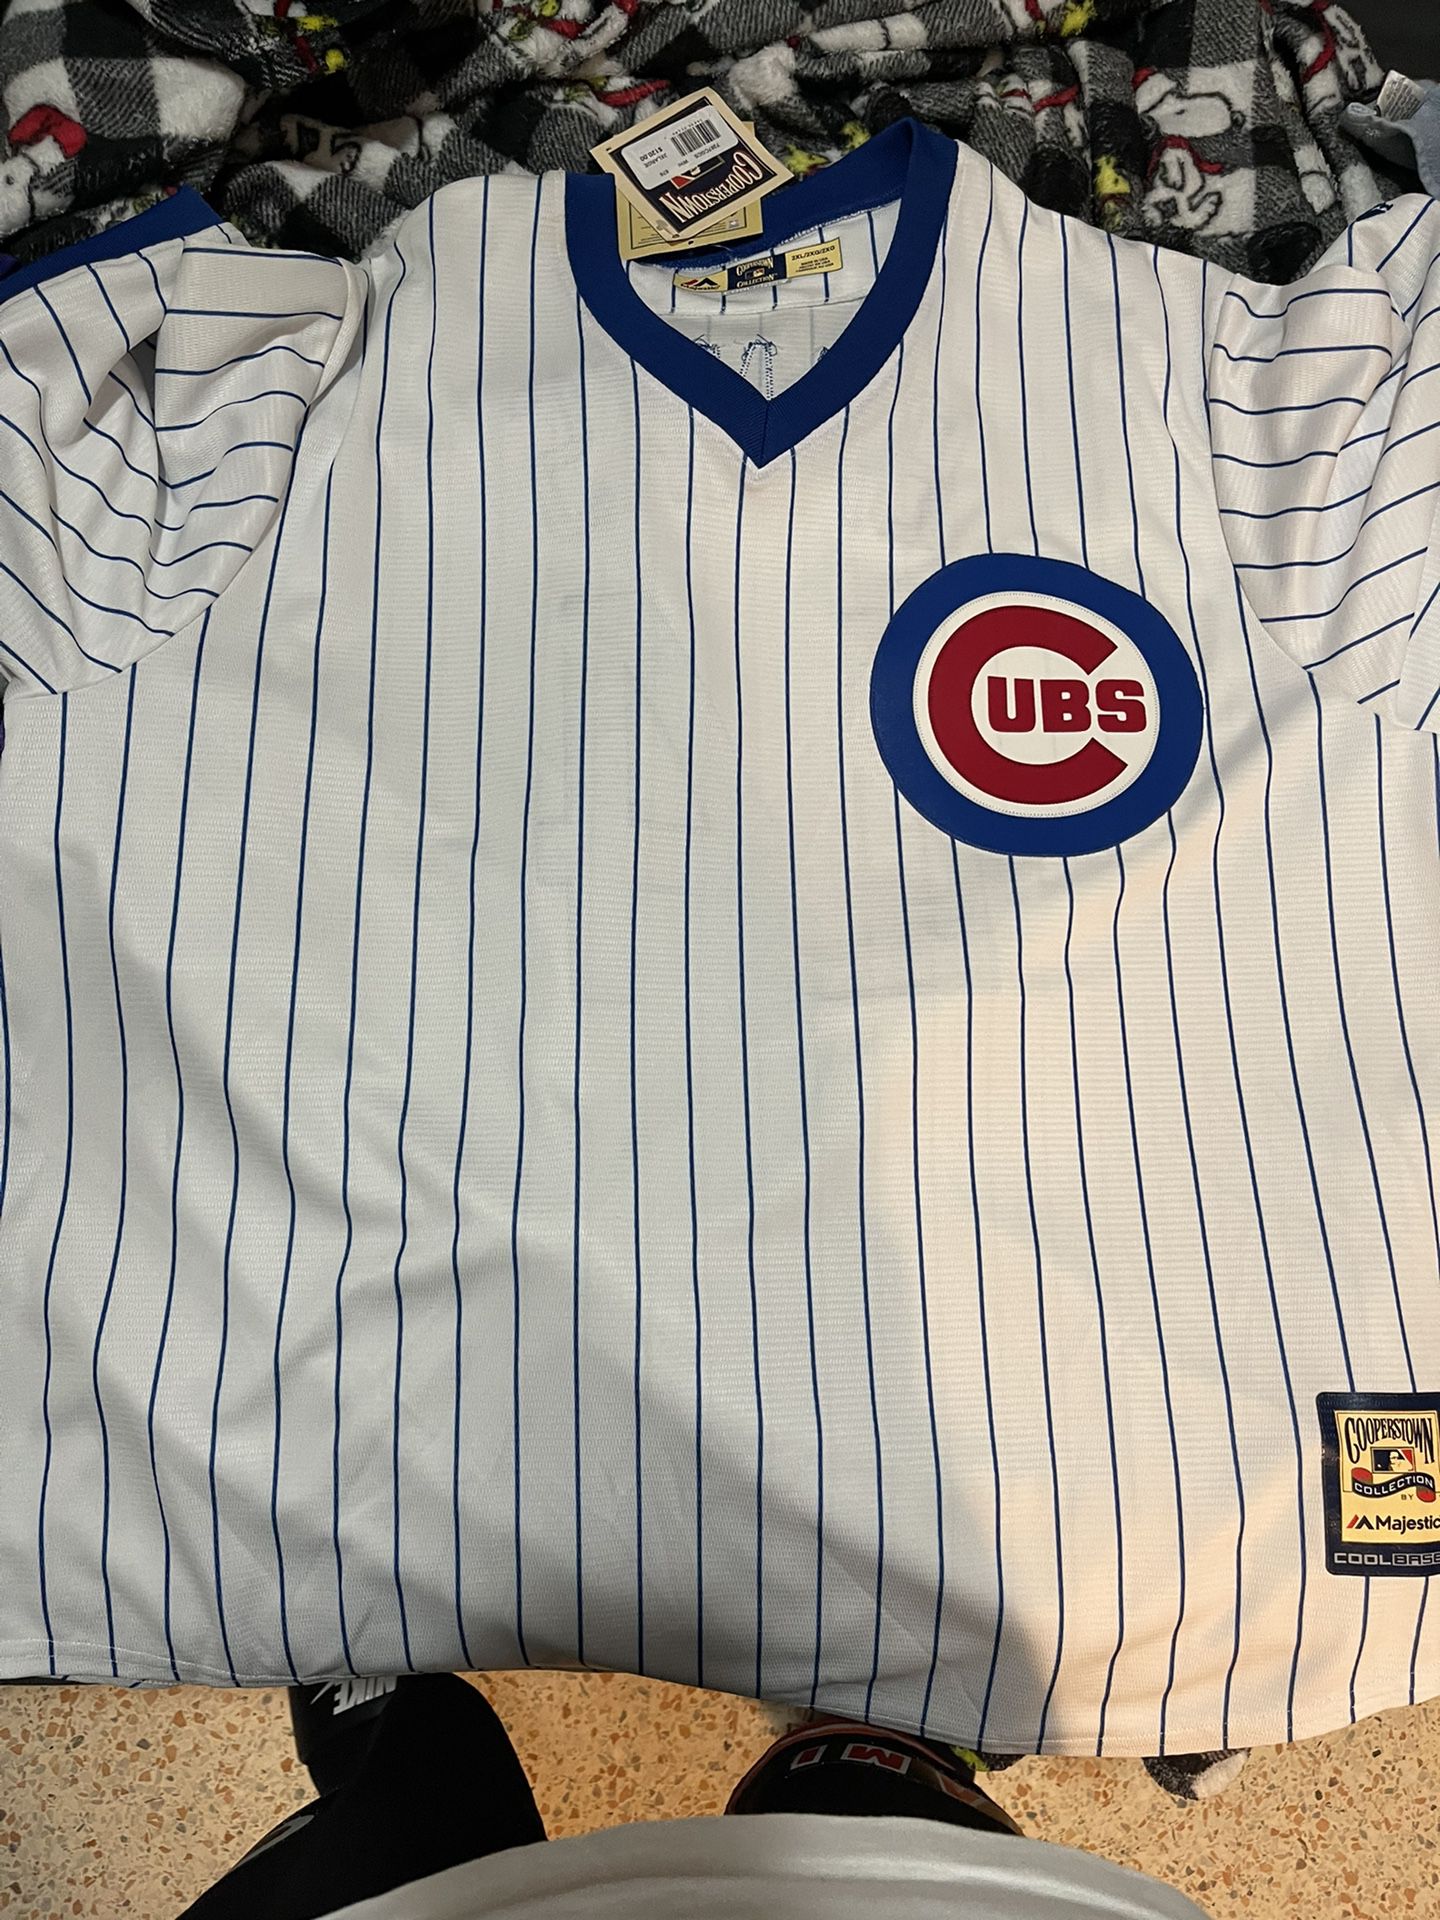 Chicago Cubs Majestic Jersey SIZE XXL  BRAND NEW 